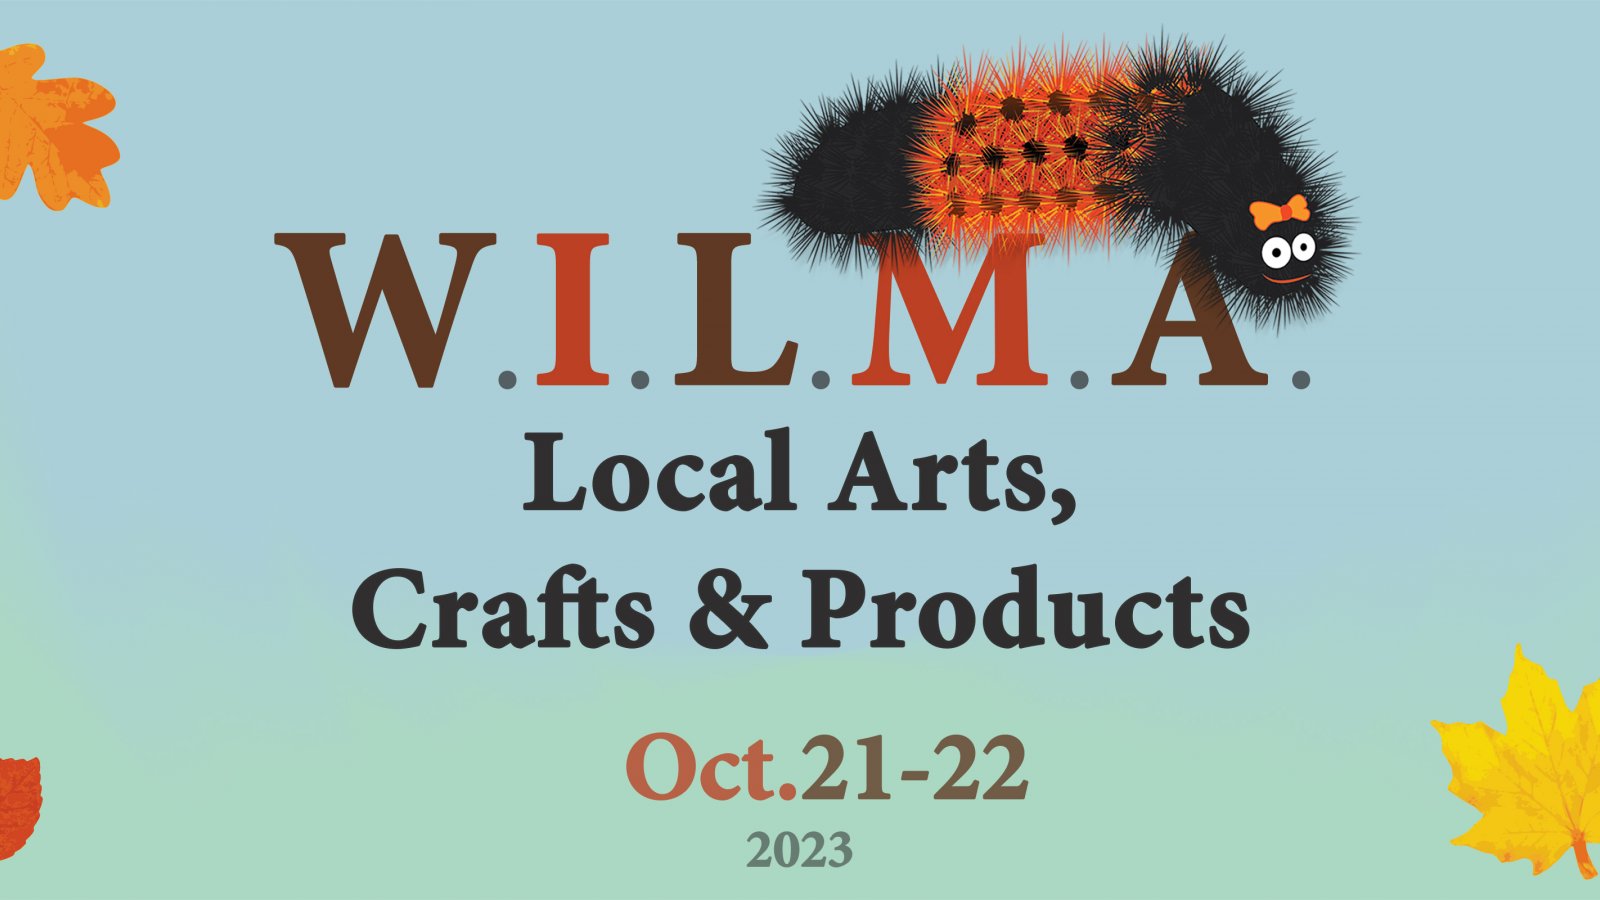 WILMA (We Invite Local Manufacturers and Artisans): Local Arts, Crafts & Products - October 21-22, 2023